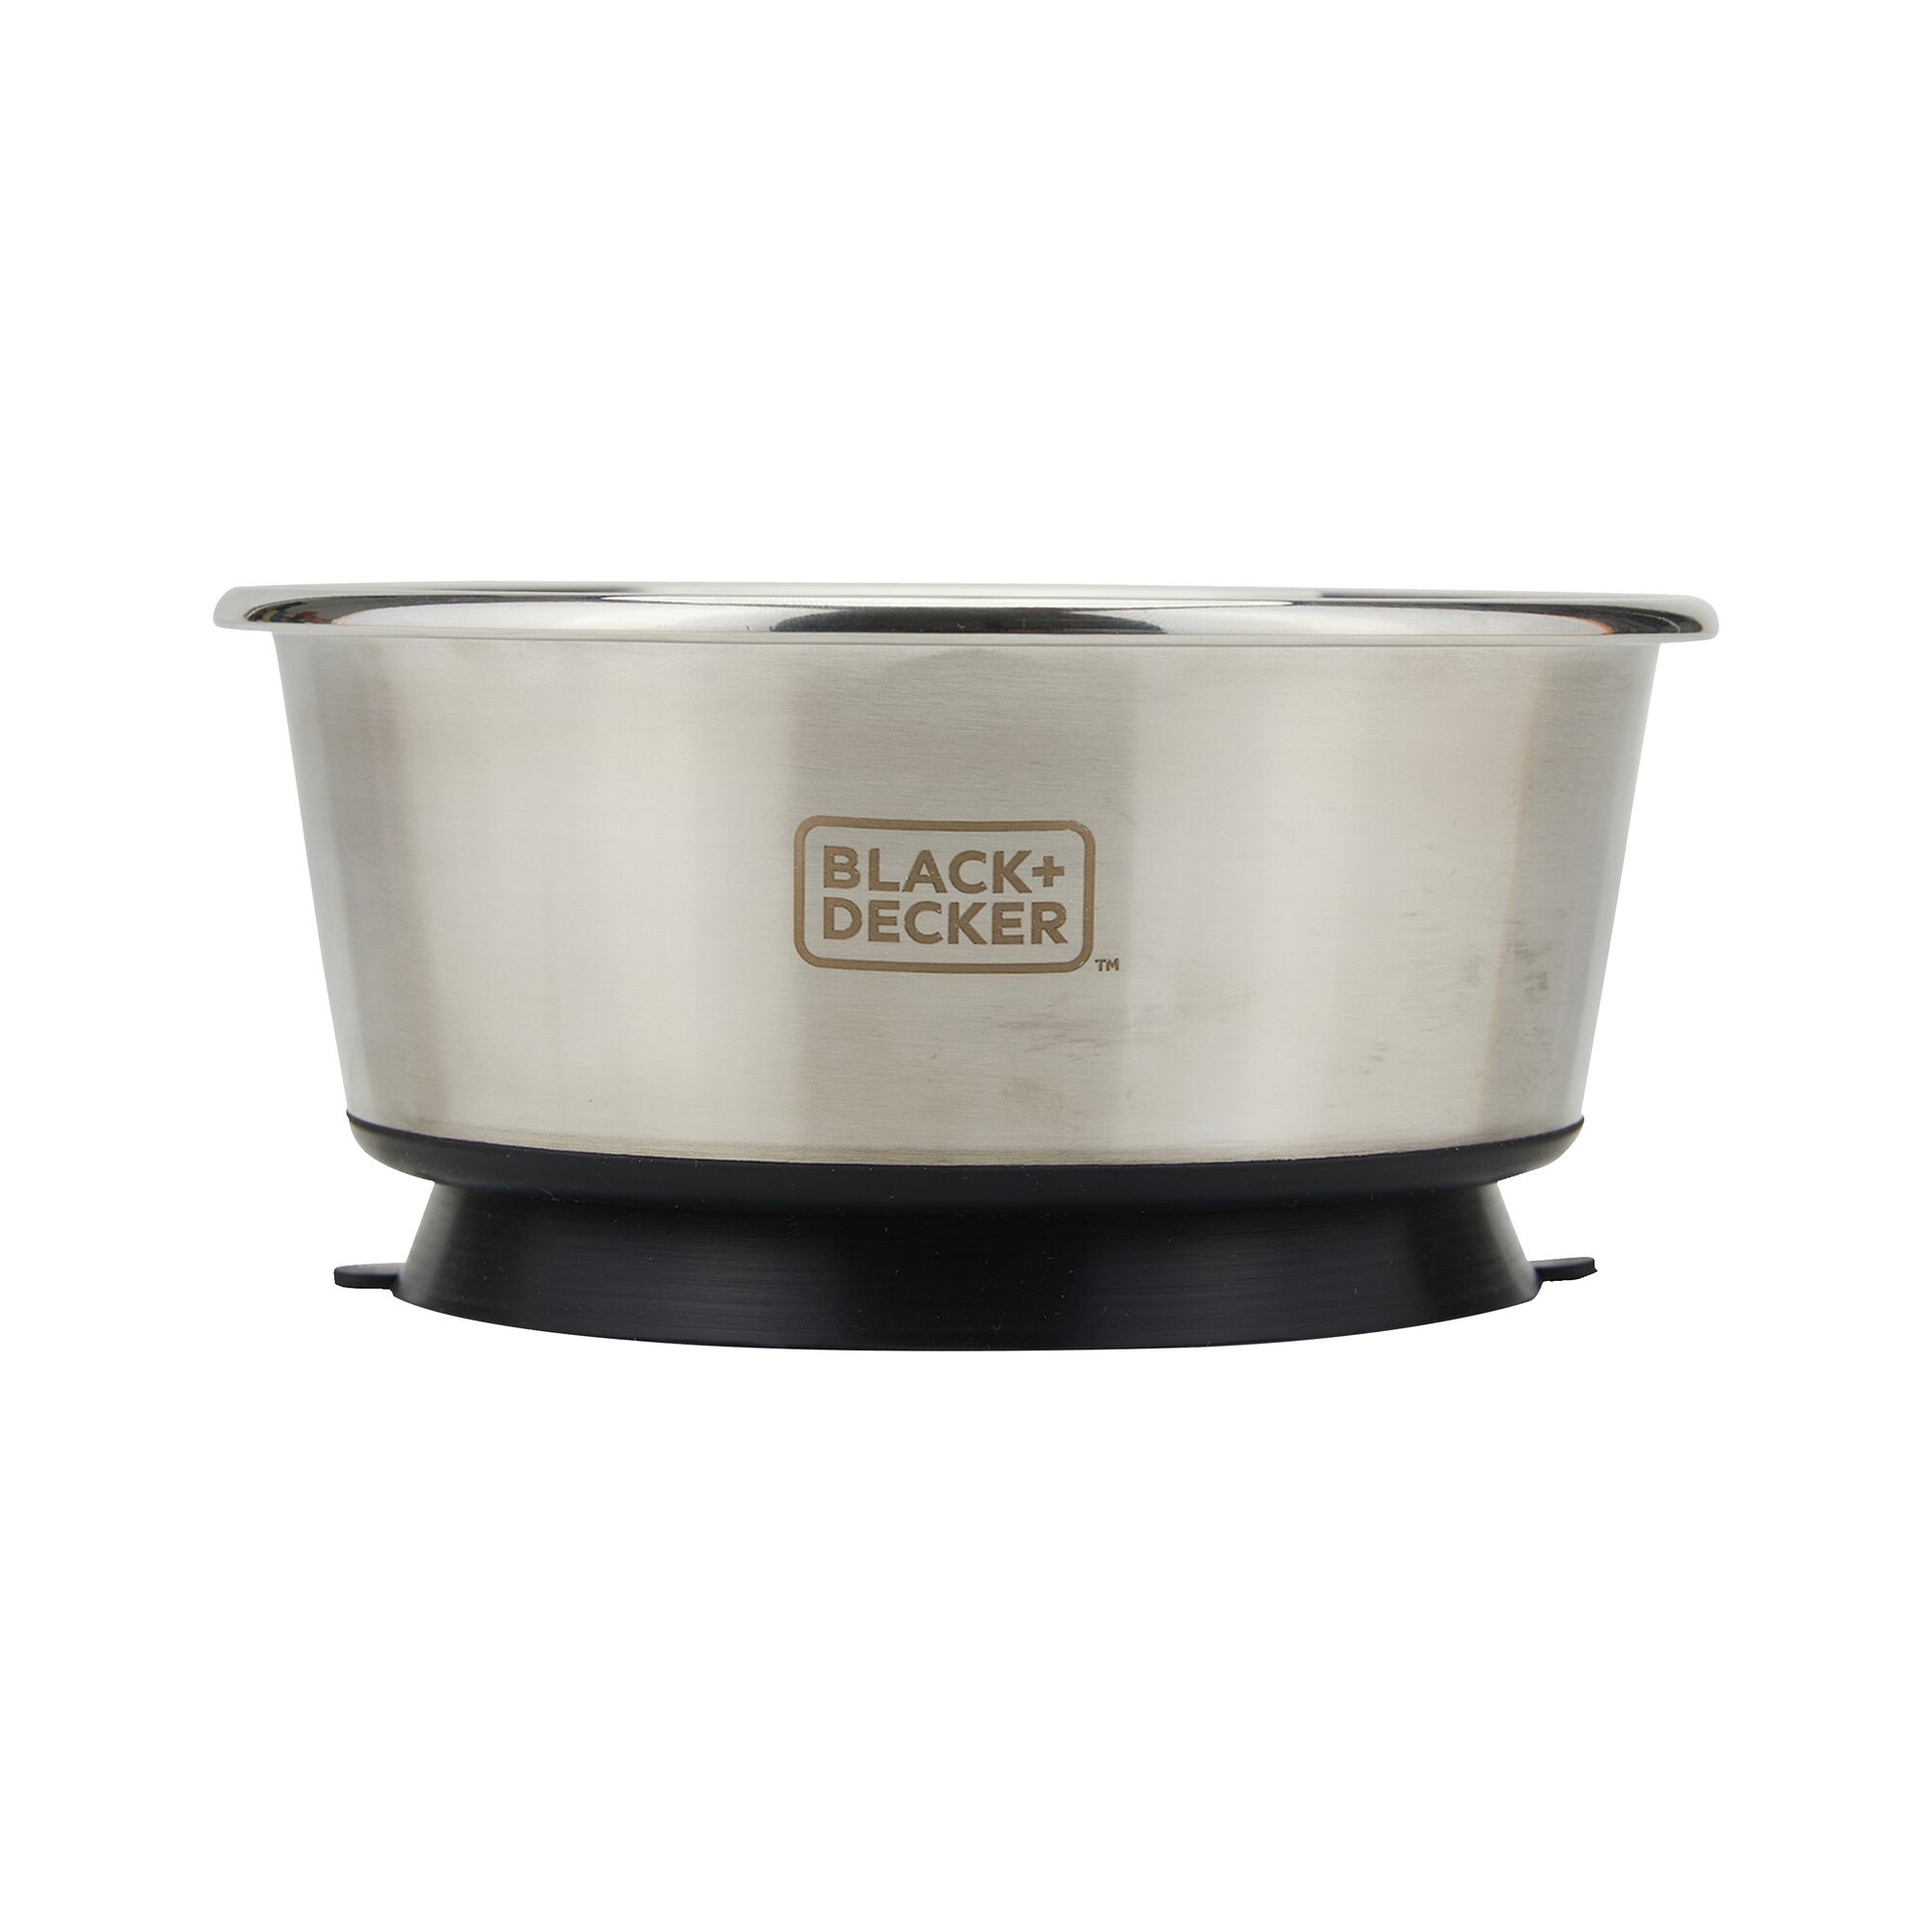 Profile side view of the suction cup dog feeding bowl with BLACK+DECKER logo on the side